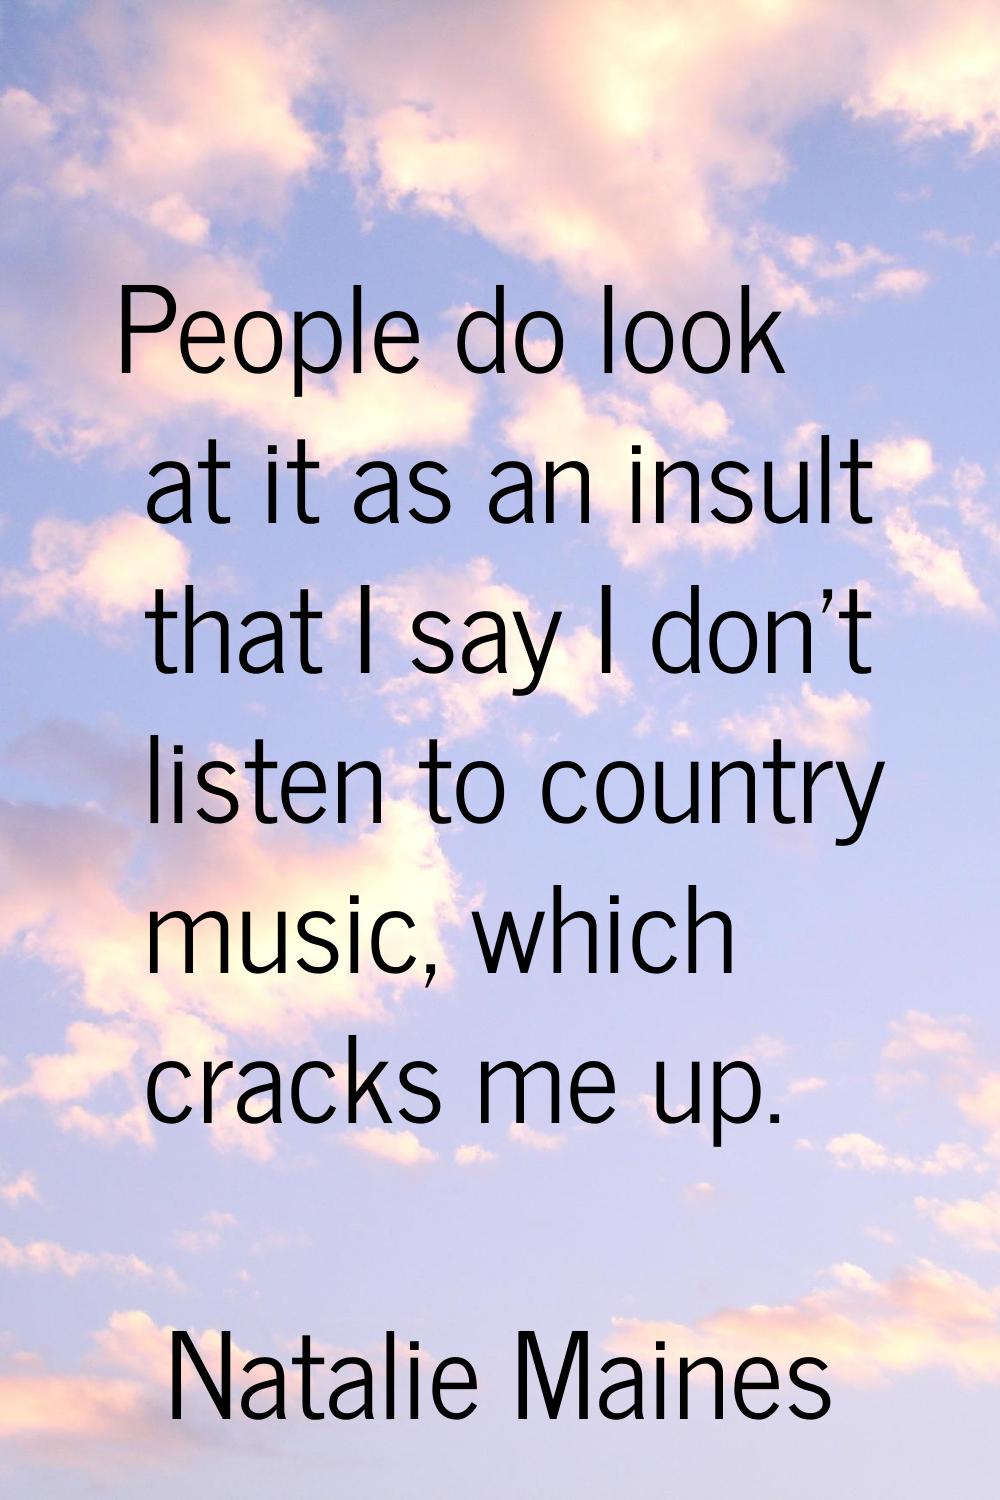 People do look at it as an insult that I say I don't listen to country music, which cracks me up.